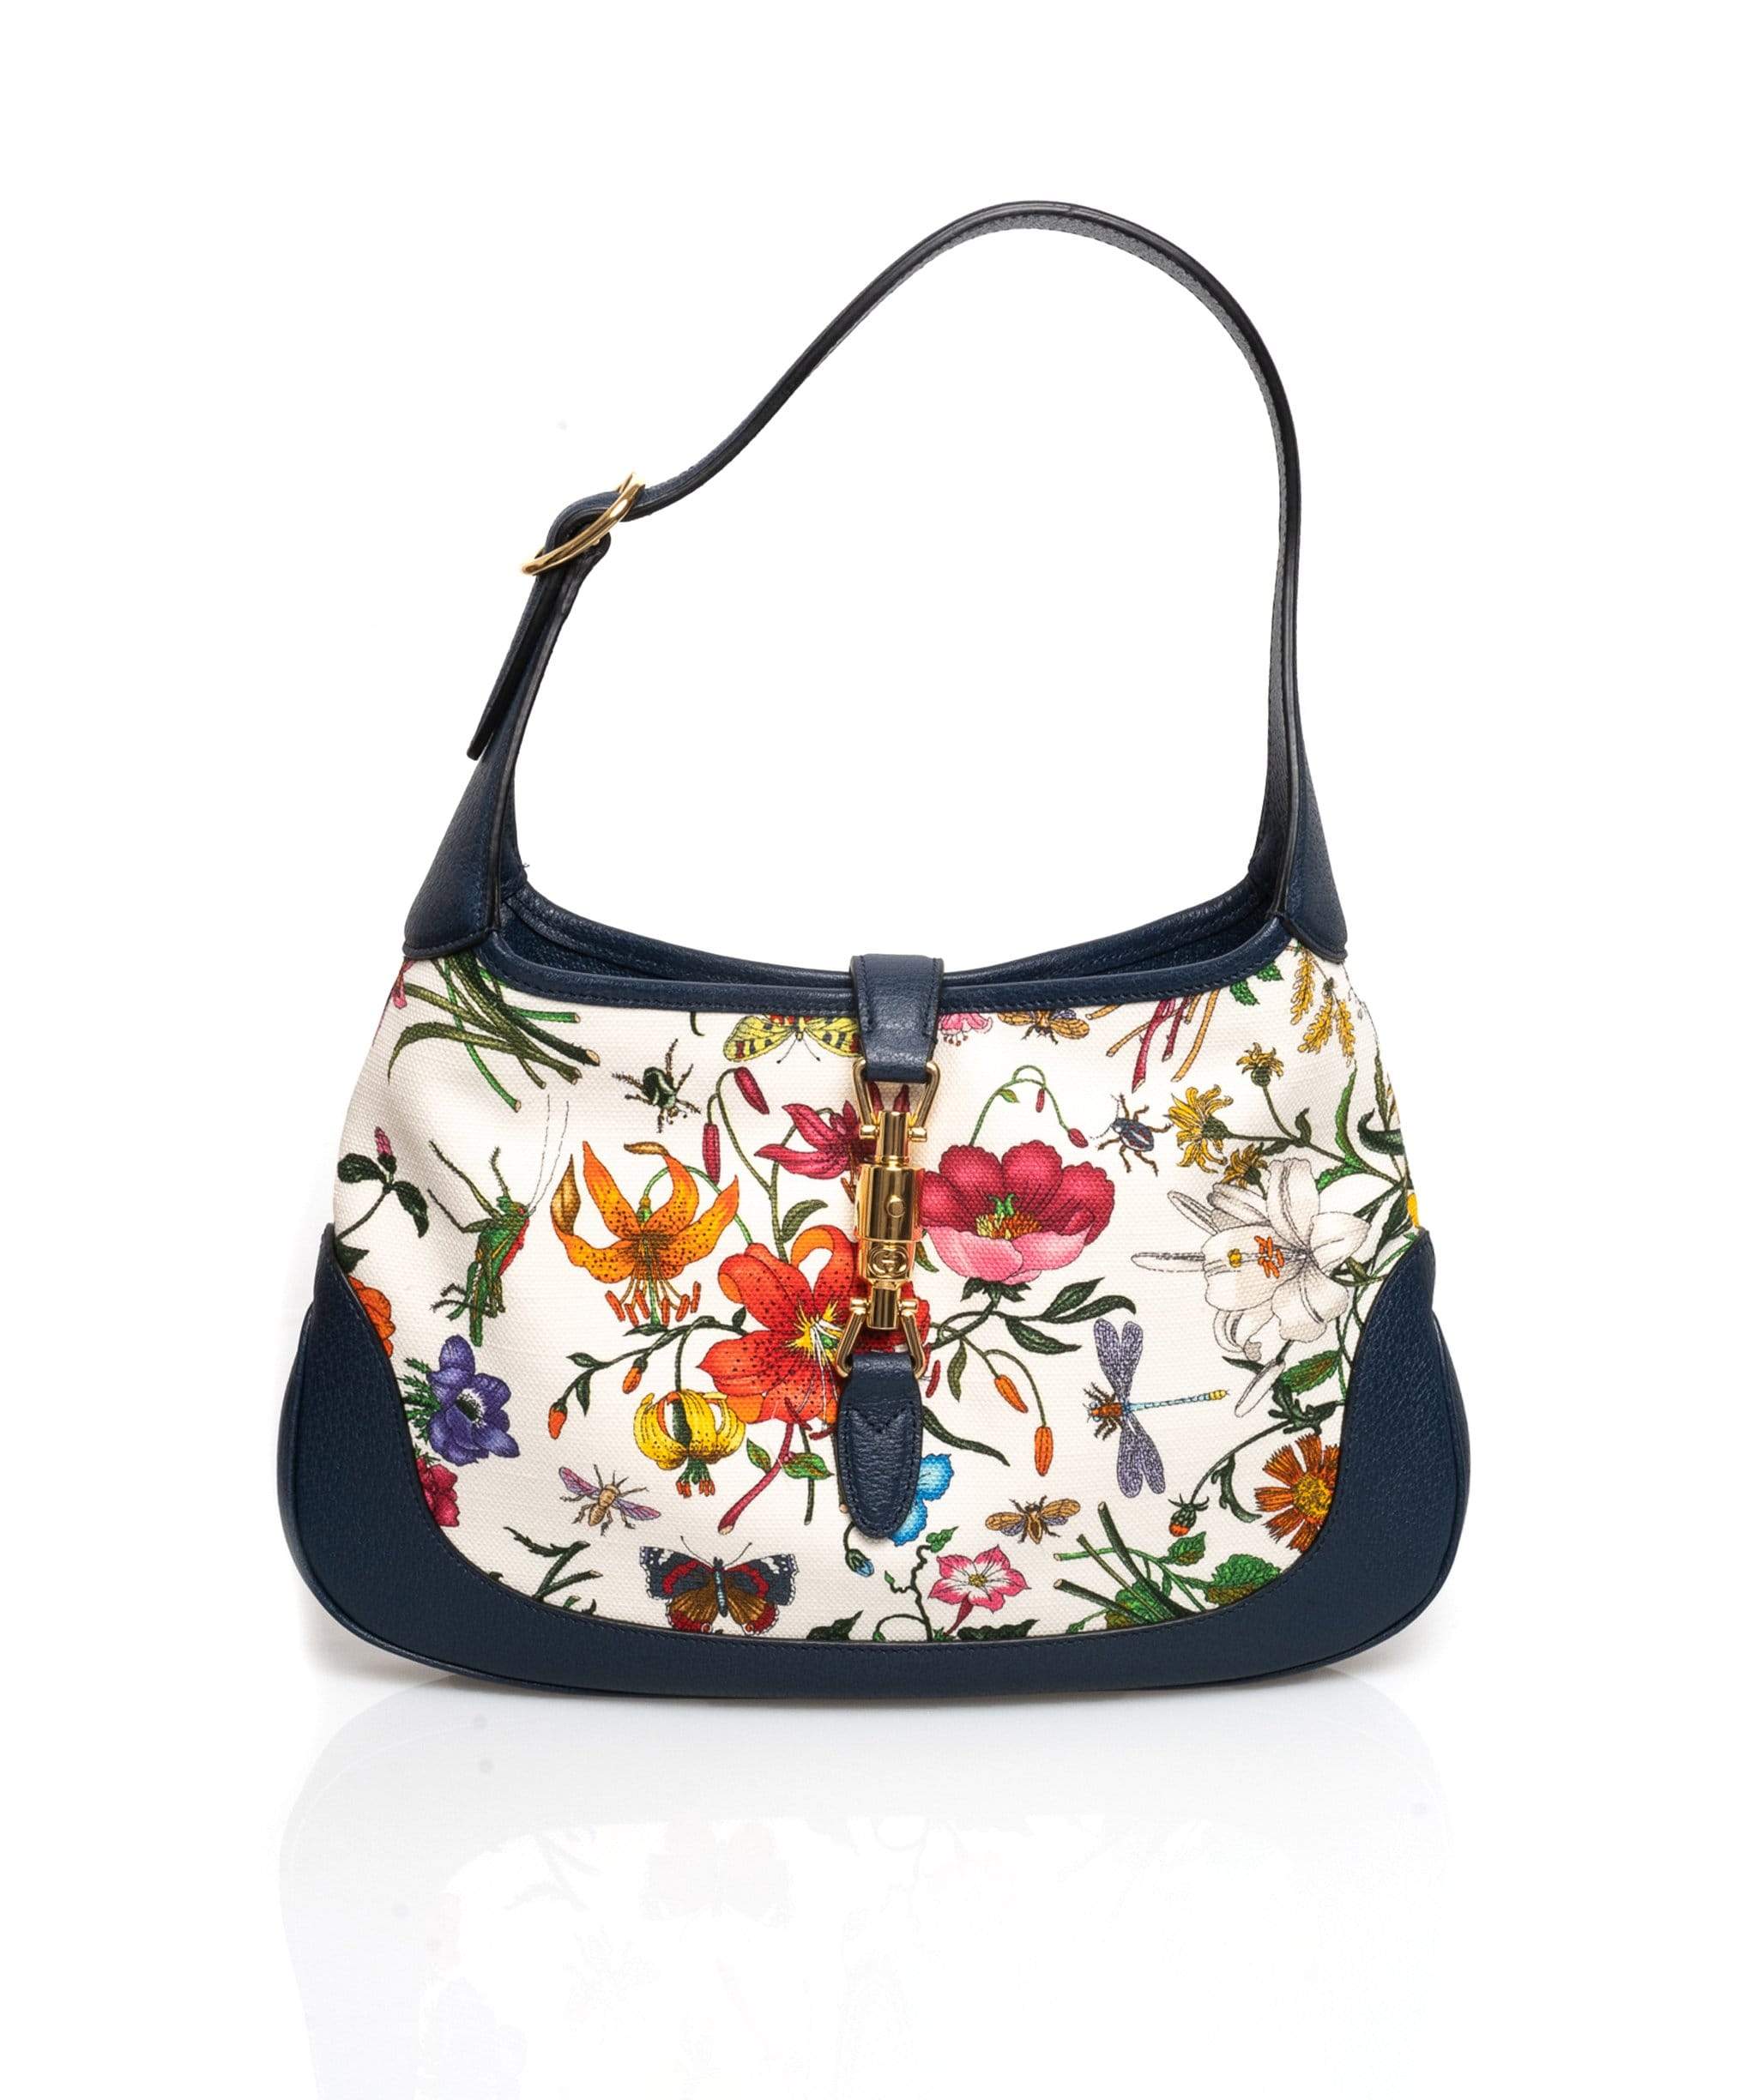 Gucci Jackie O Floral Hobo Bag NW3788 – LuxuryPromise